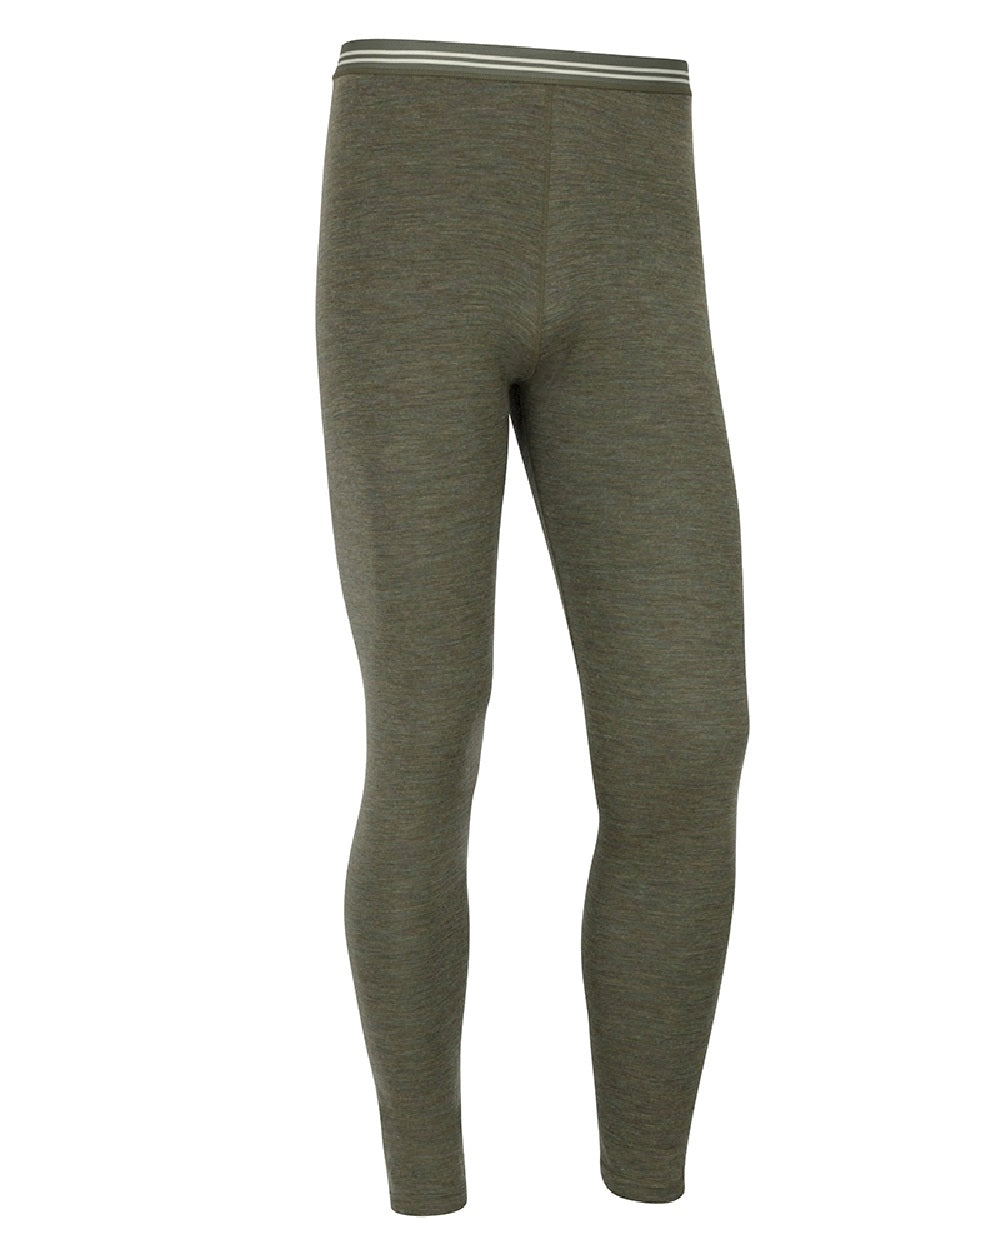 Long Johns M's Protection LITE - Woolpower UK